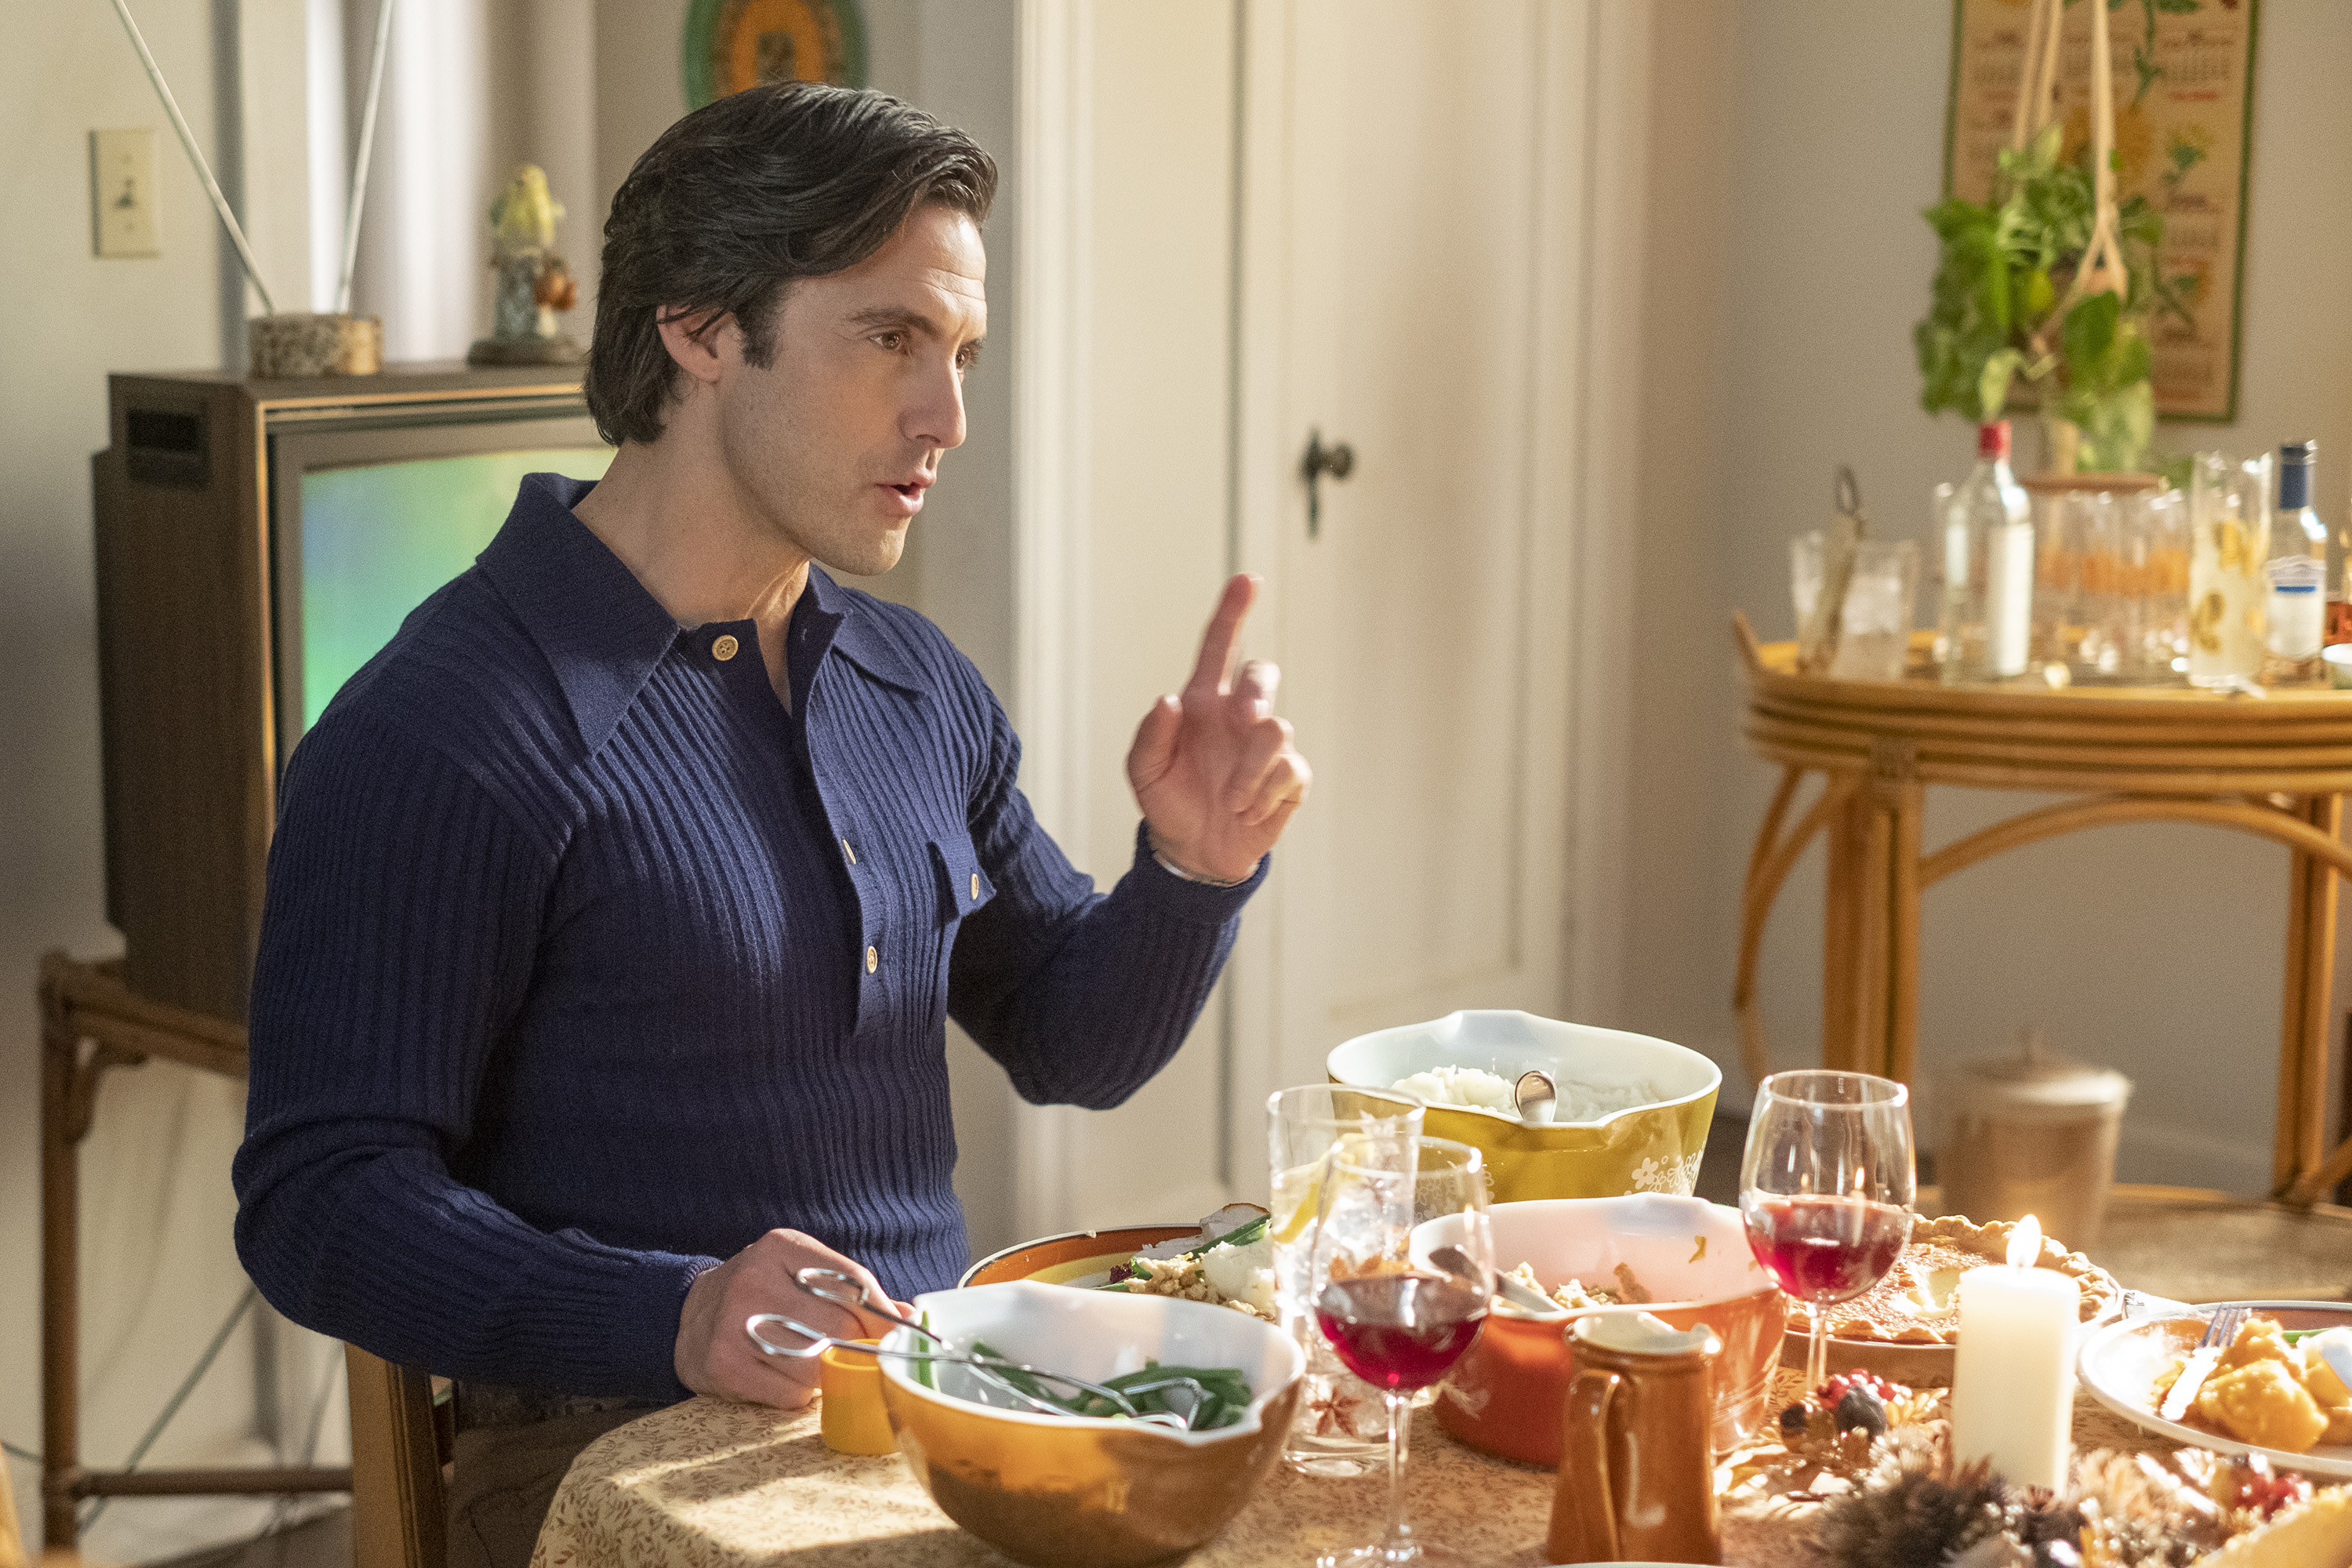 Milo Ventimiglia, in character as Jack Pearson in 'This Is Us' on NBC, wears a dark blue long-sleeved collared shirt and sits at the dinner table.